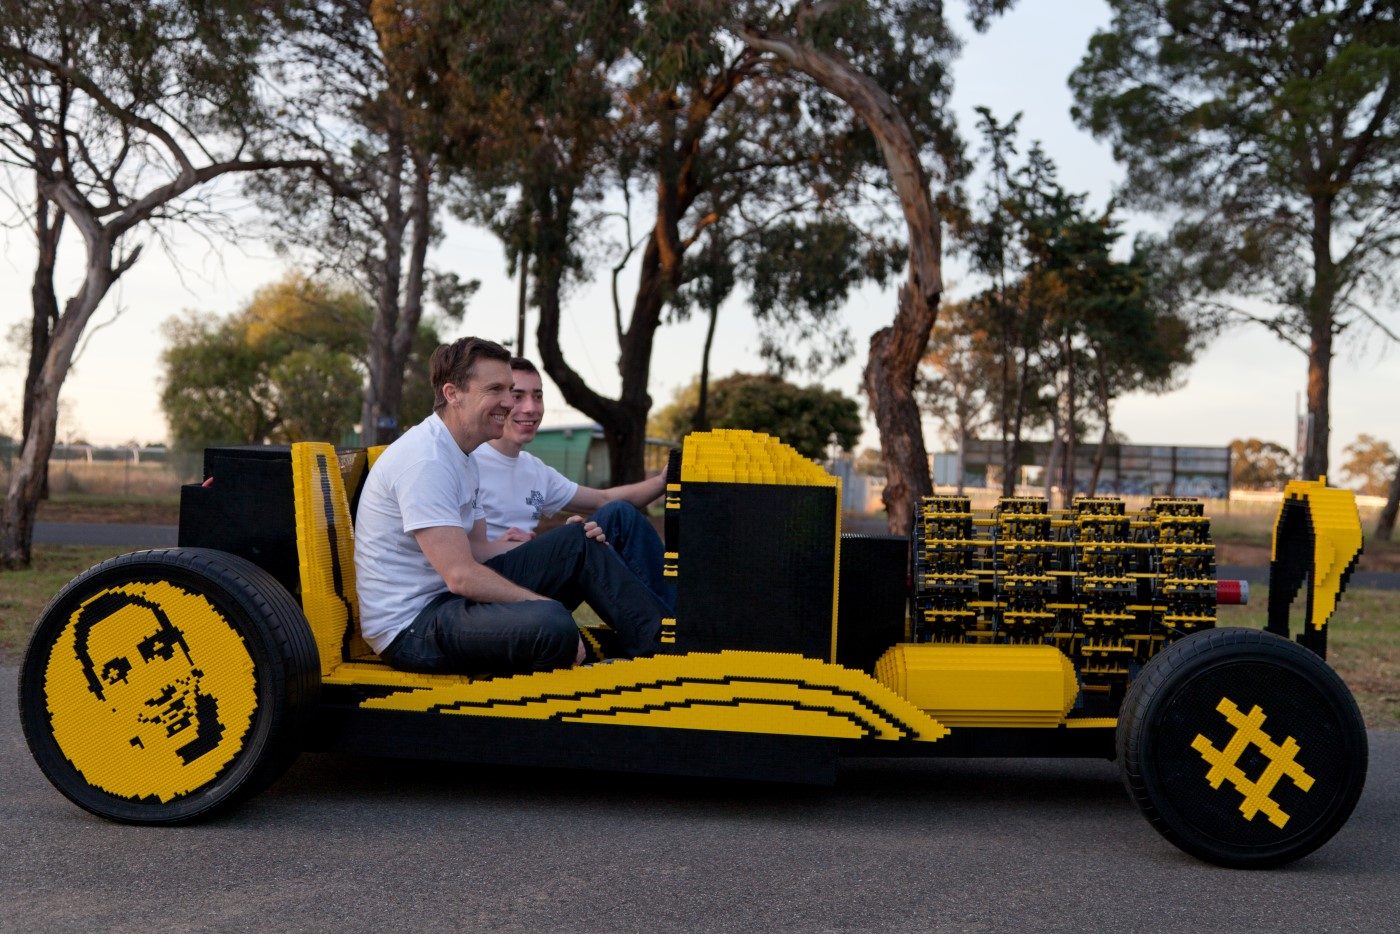 air-powered-lego-hot-rod-images-josh-rowe-via-super-awesome-micro-project_100449717_h.jpg